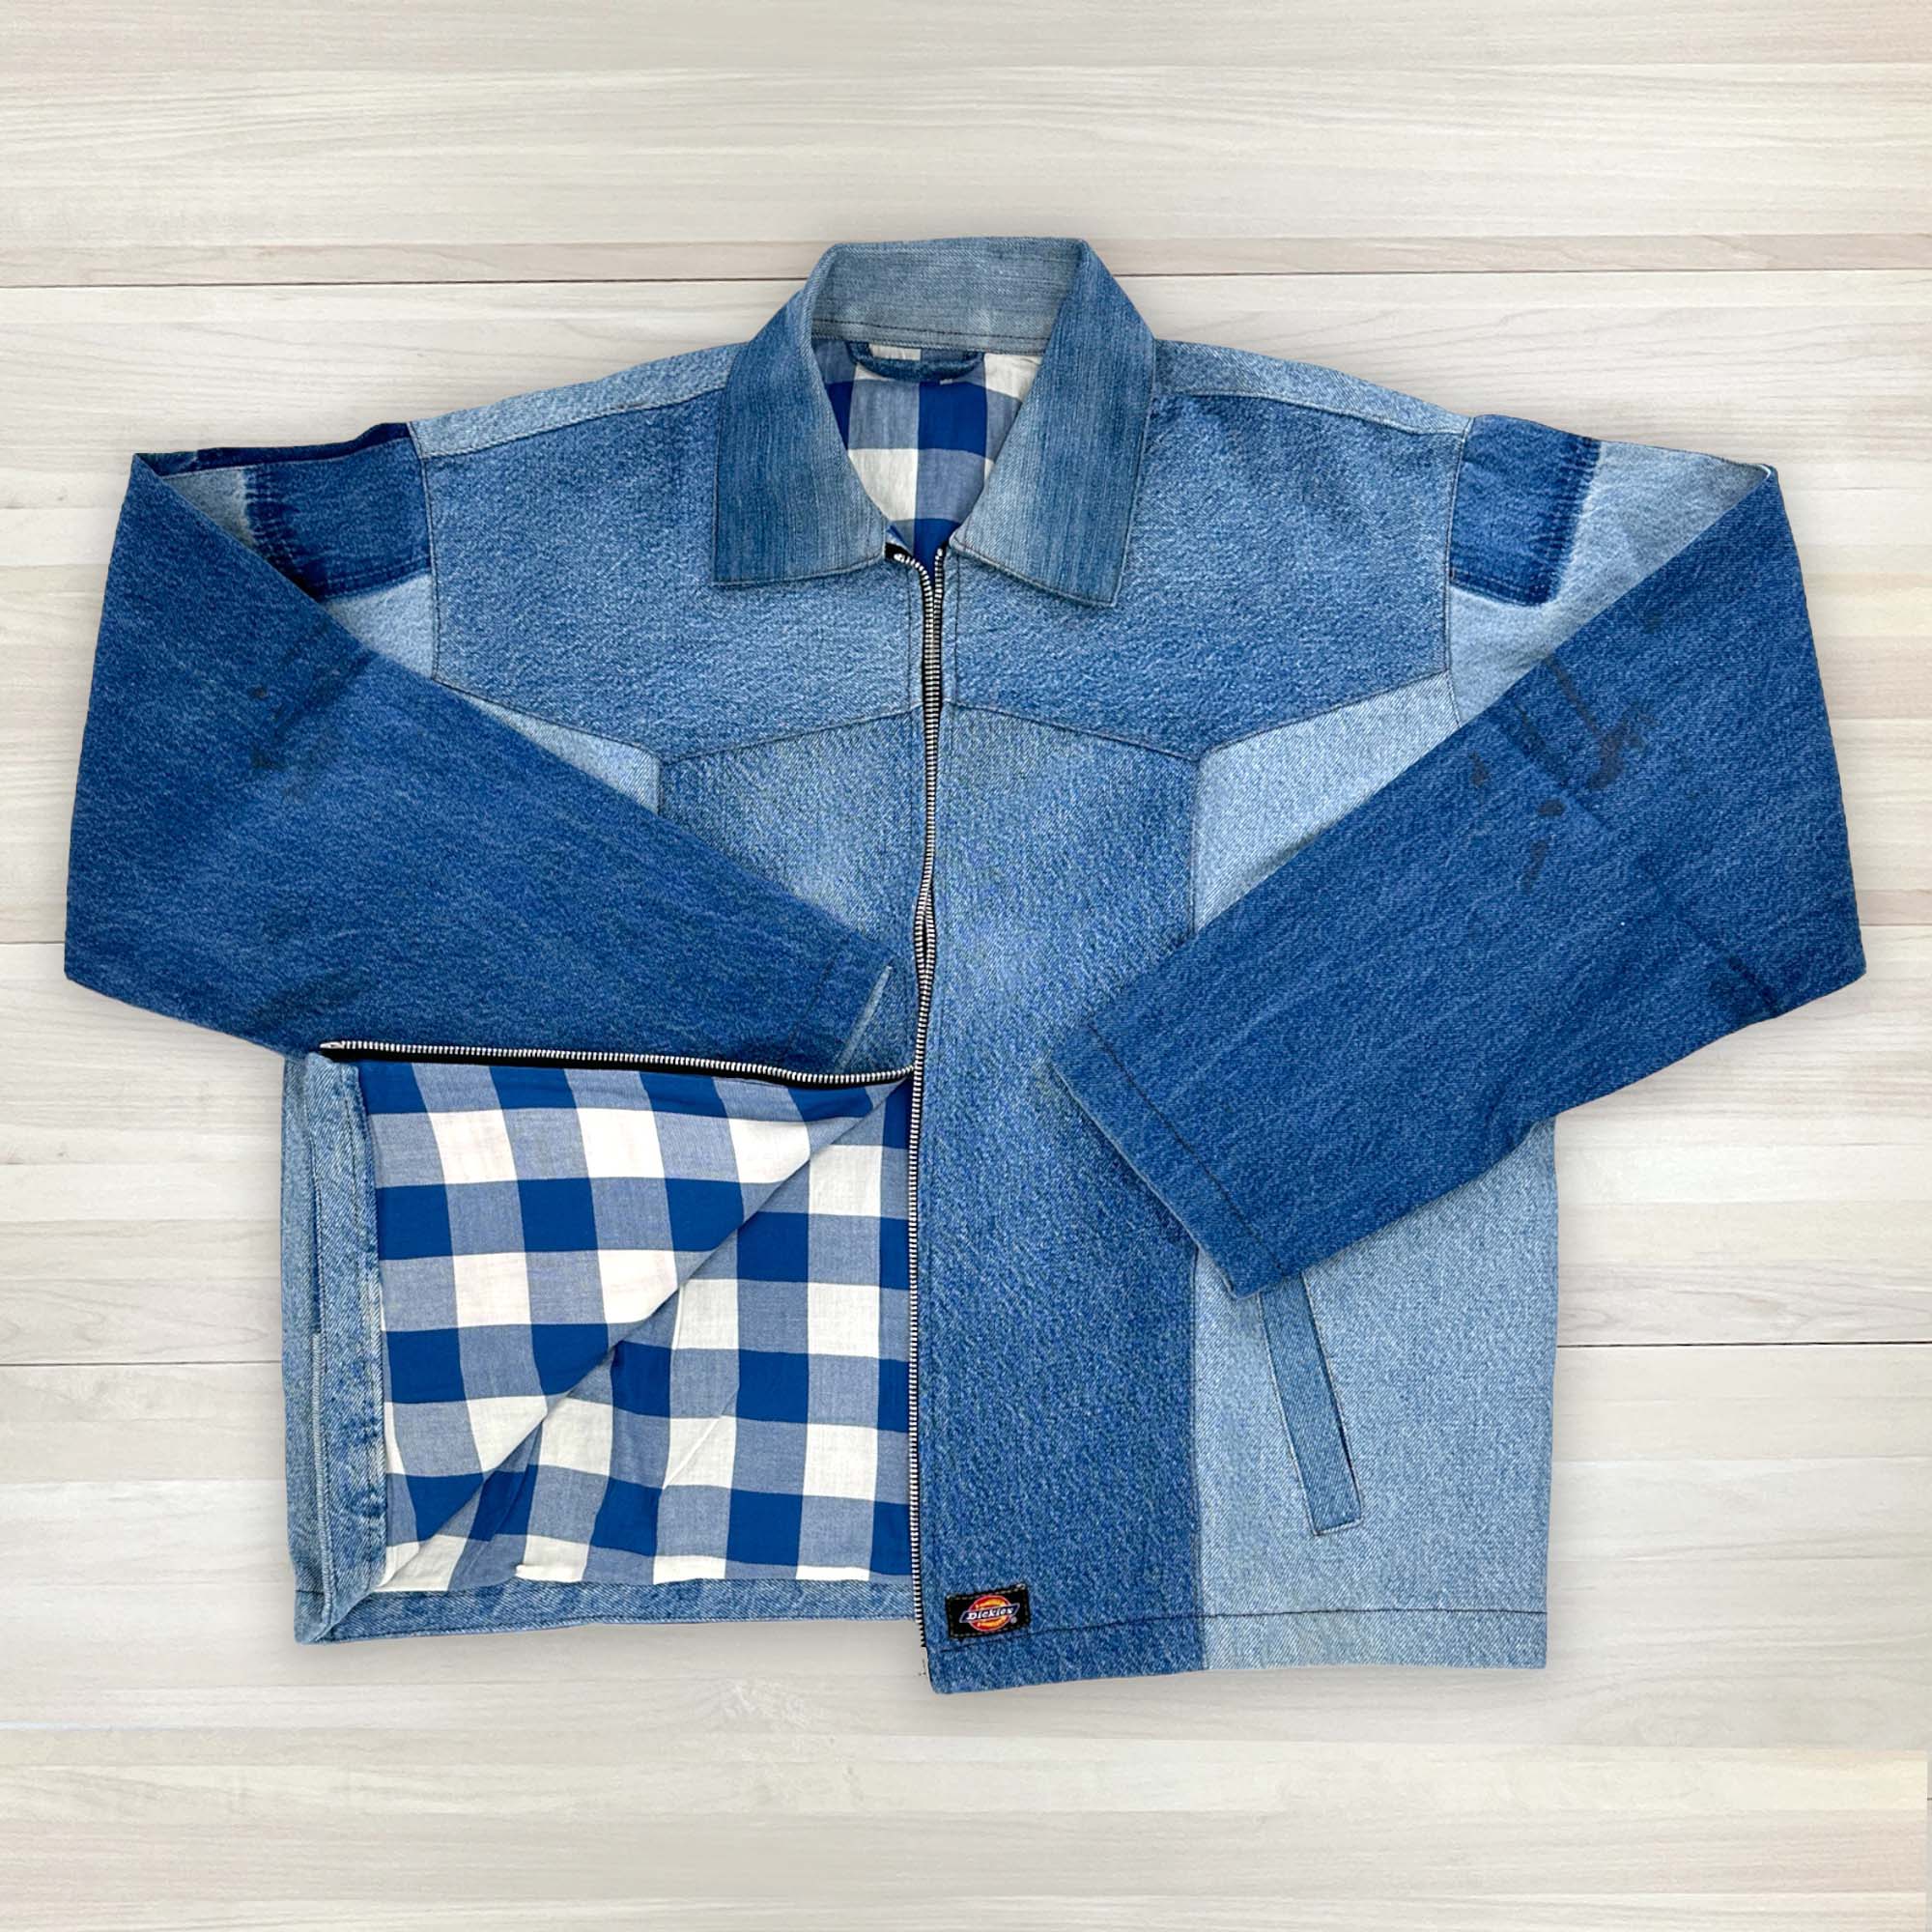 Men's collection image: chore jacket made from recycled jeans